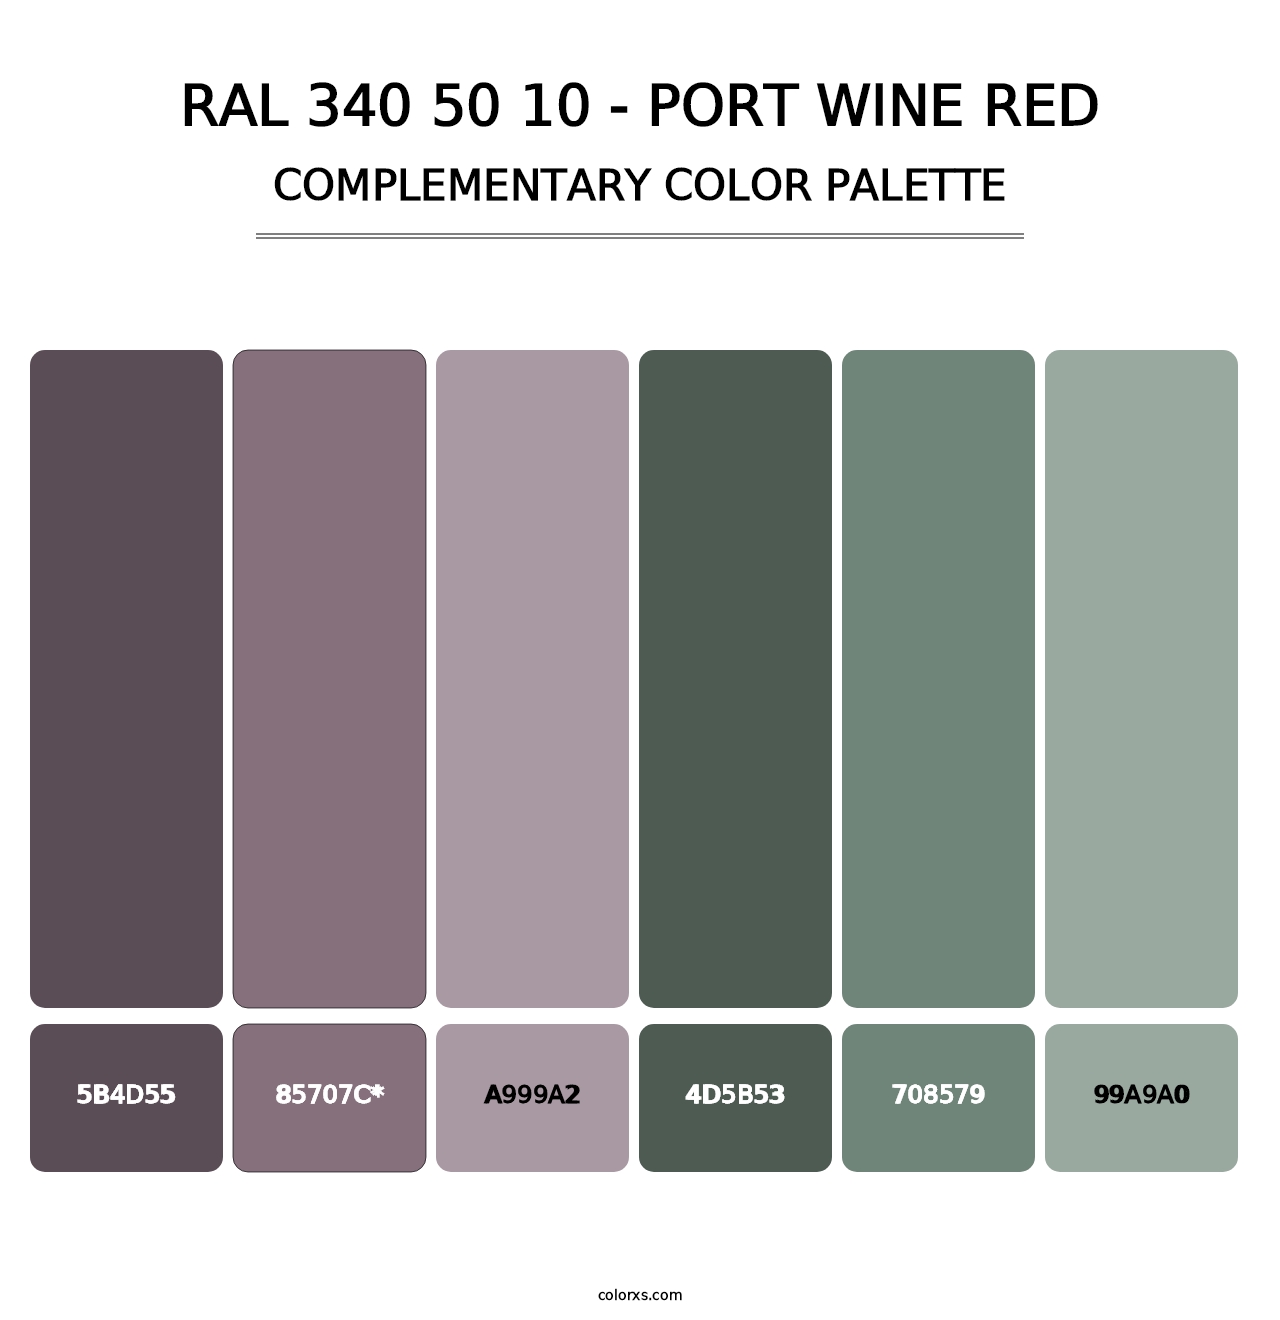 RAL 340 50 10 - Port Wine Red - Complementary Color Palette